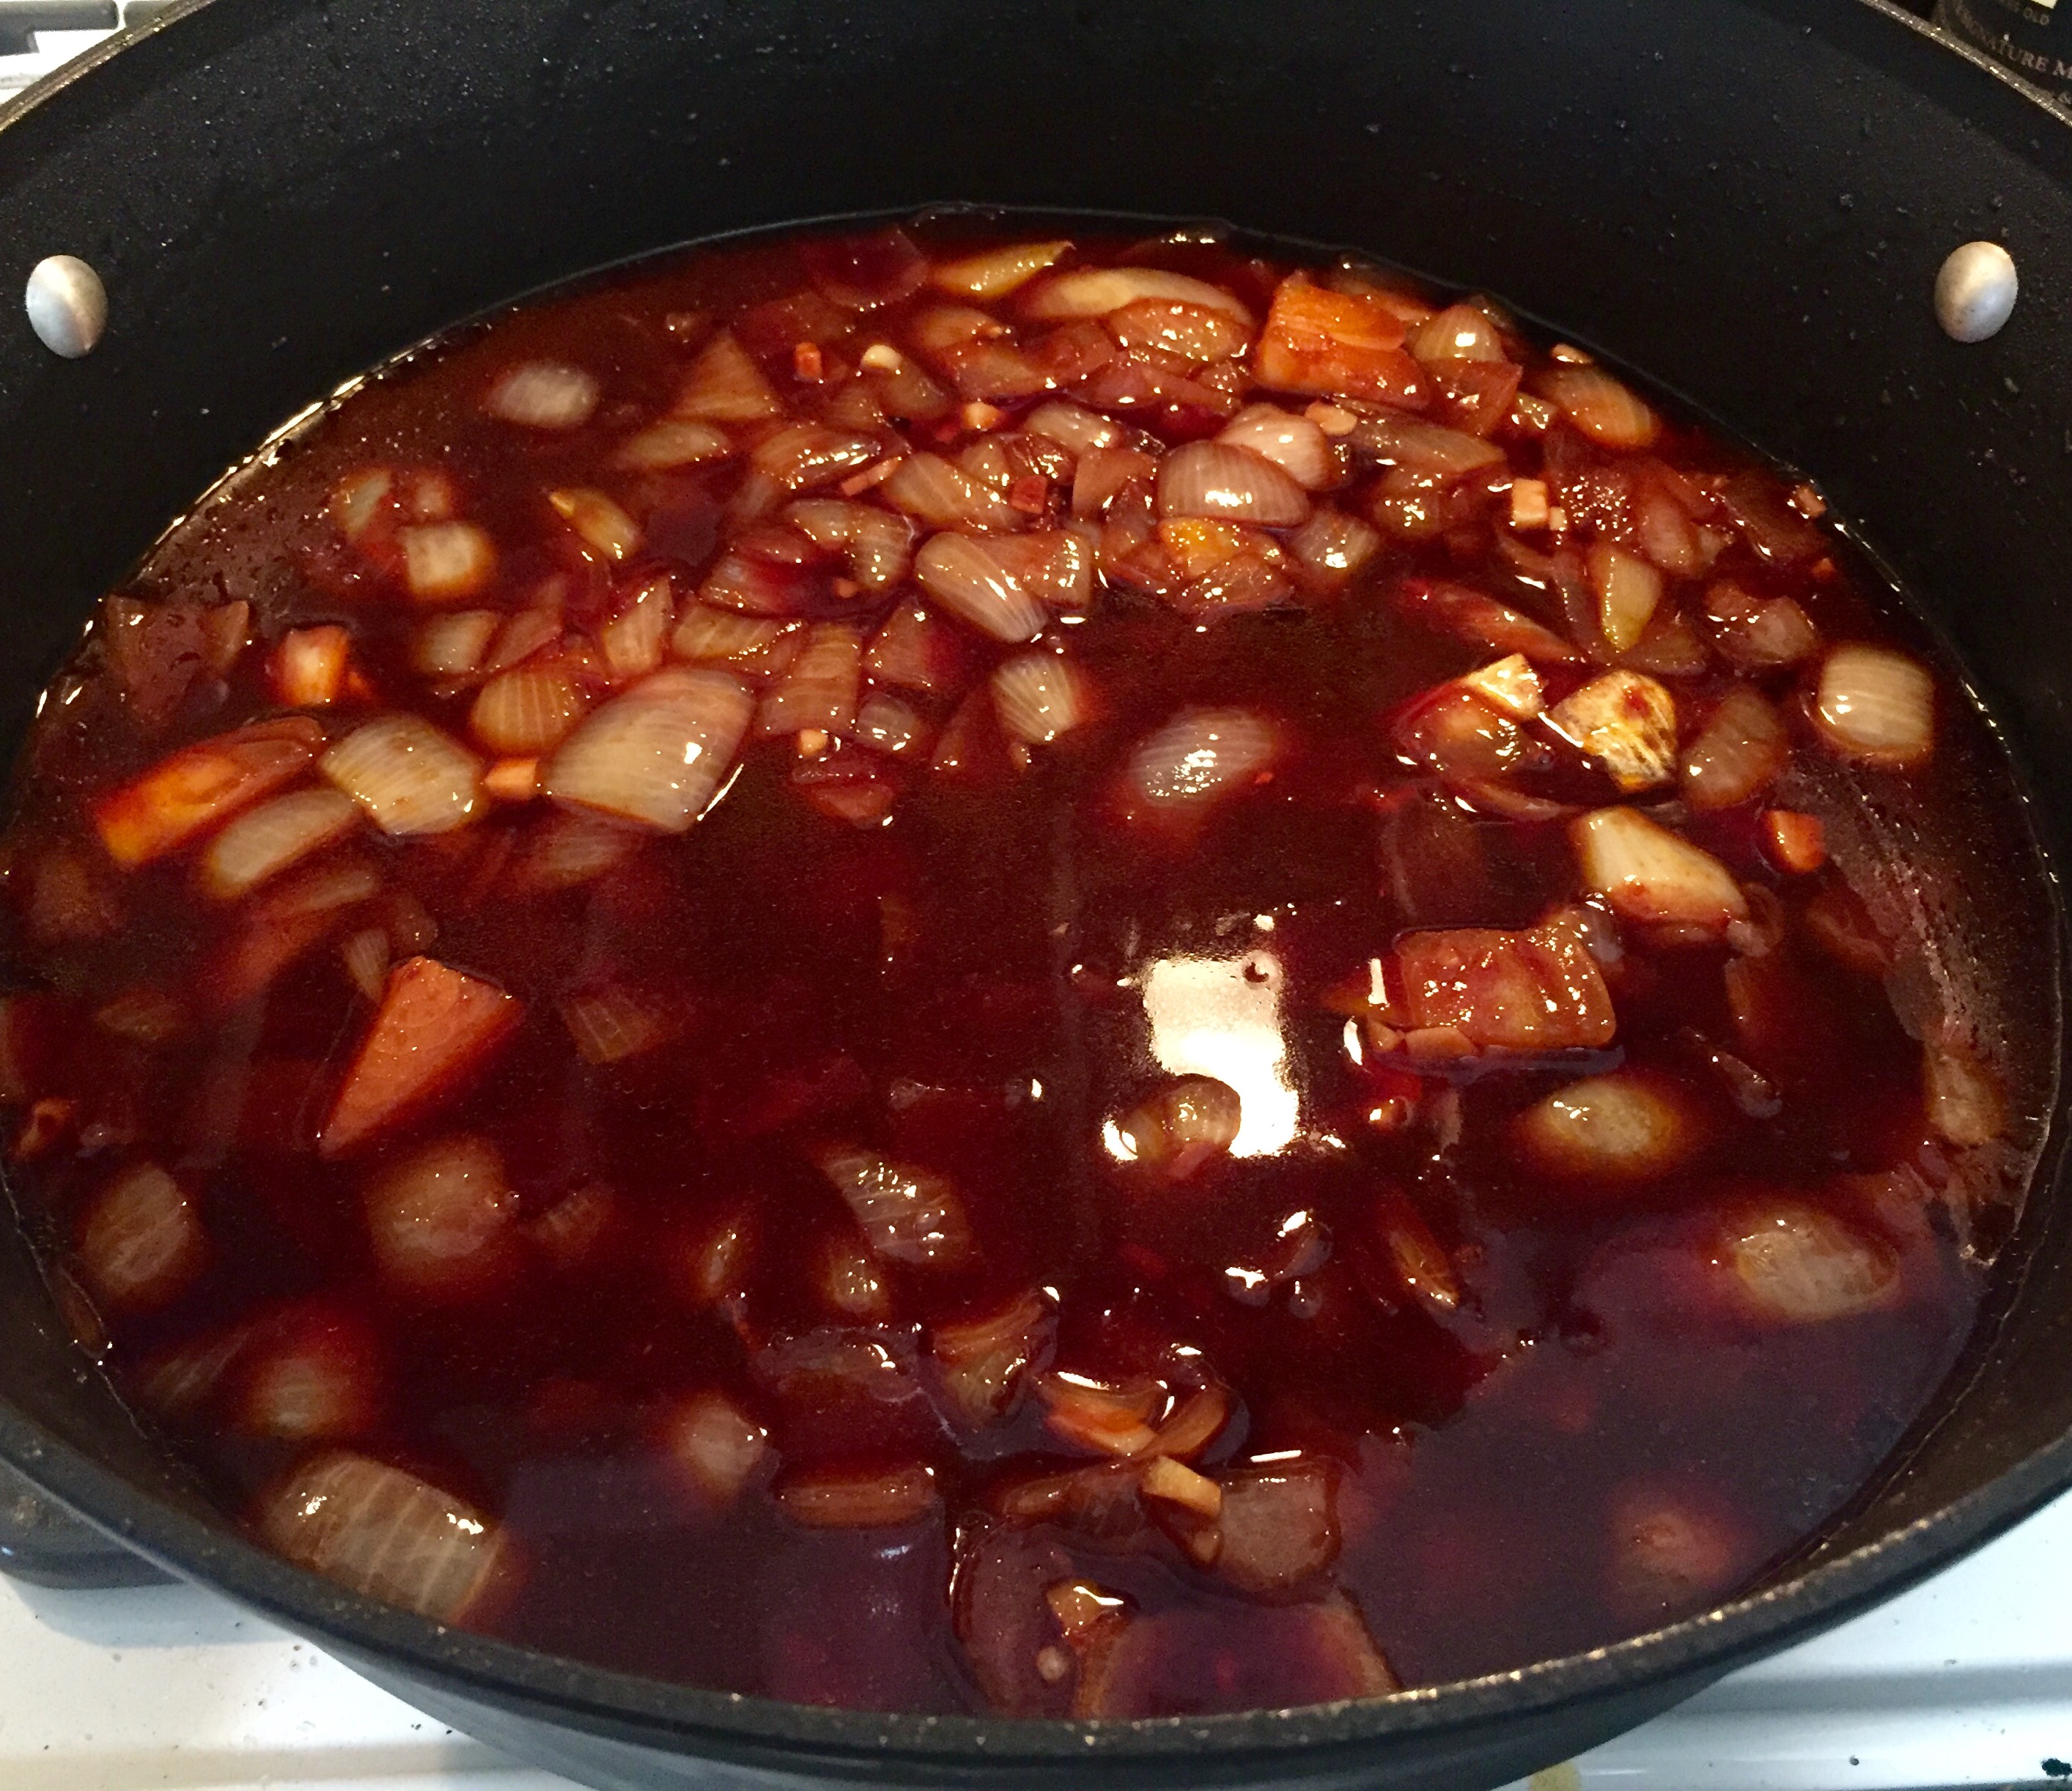 Red wine reduction